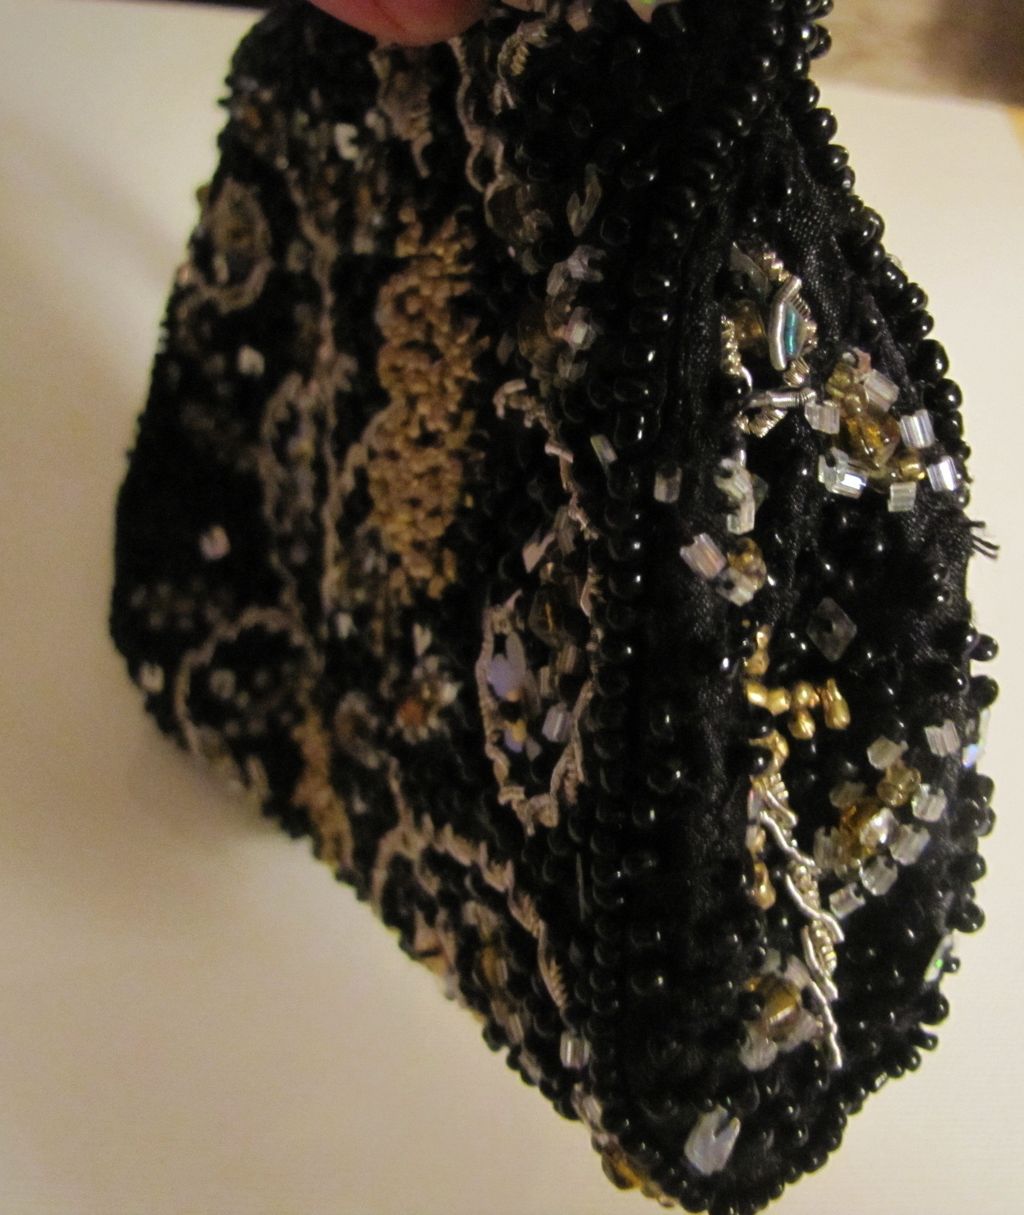 Vintage purse hand beaded with sequins zipper pocket inside